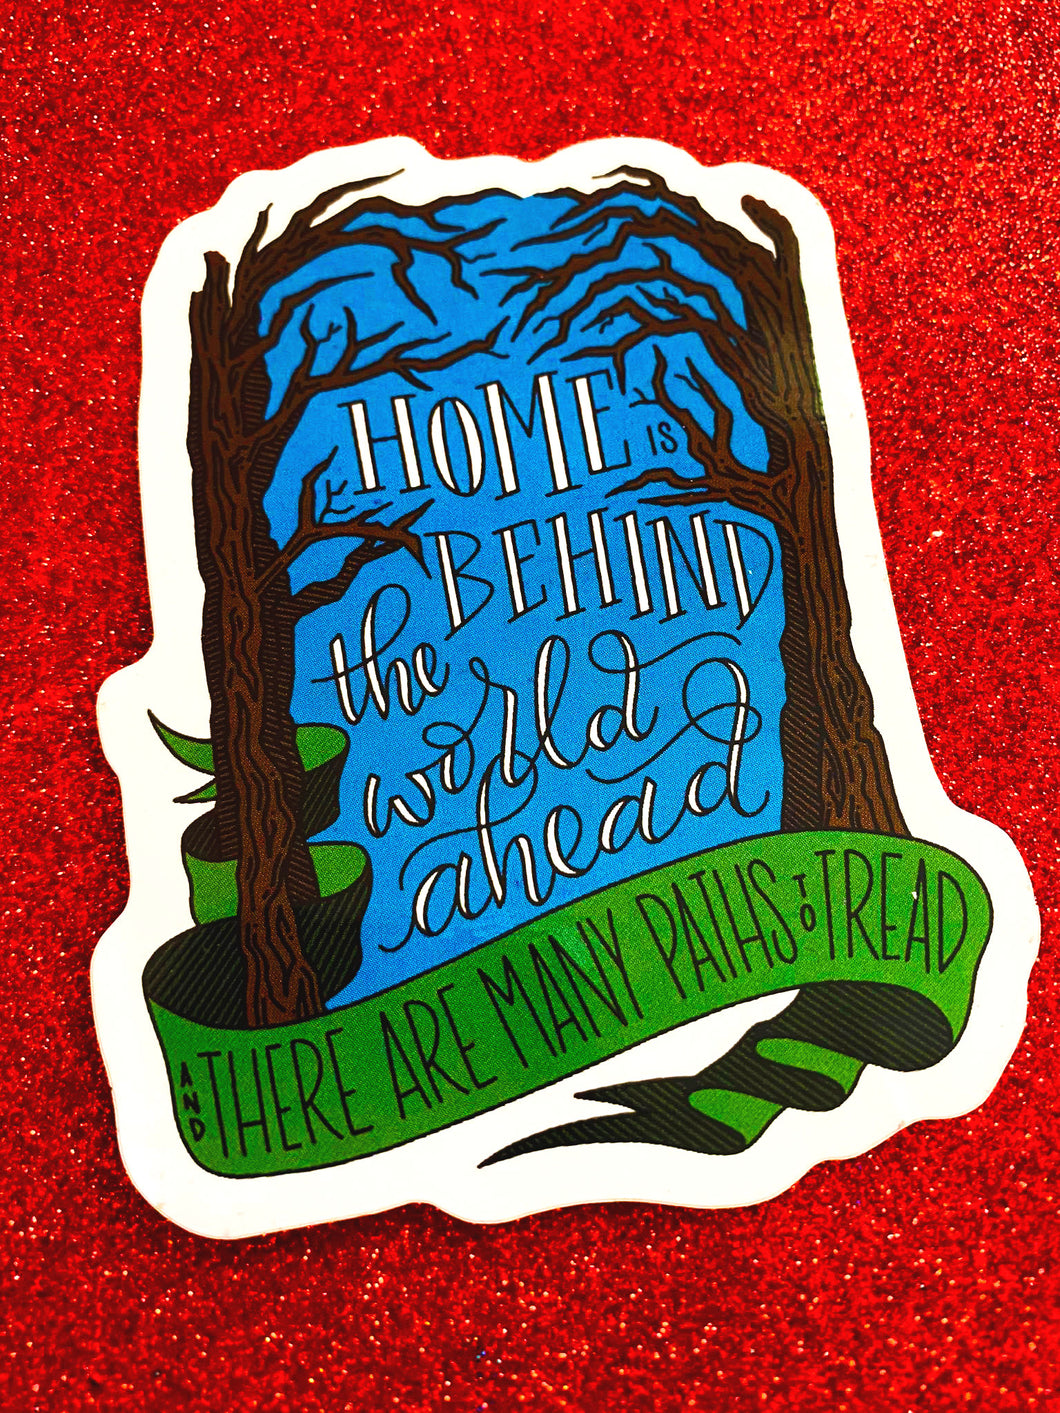 Home is behind the world ahead and there are many paths to tread - Sticker quote